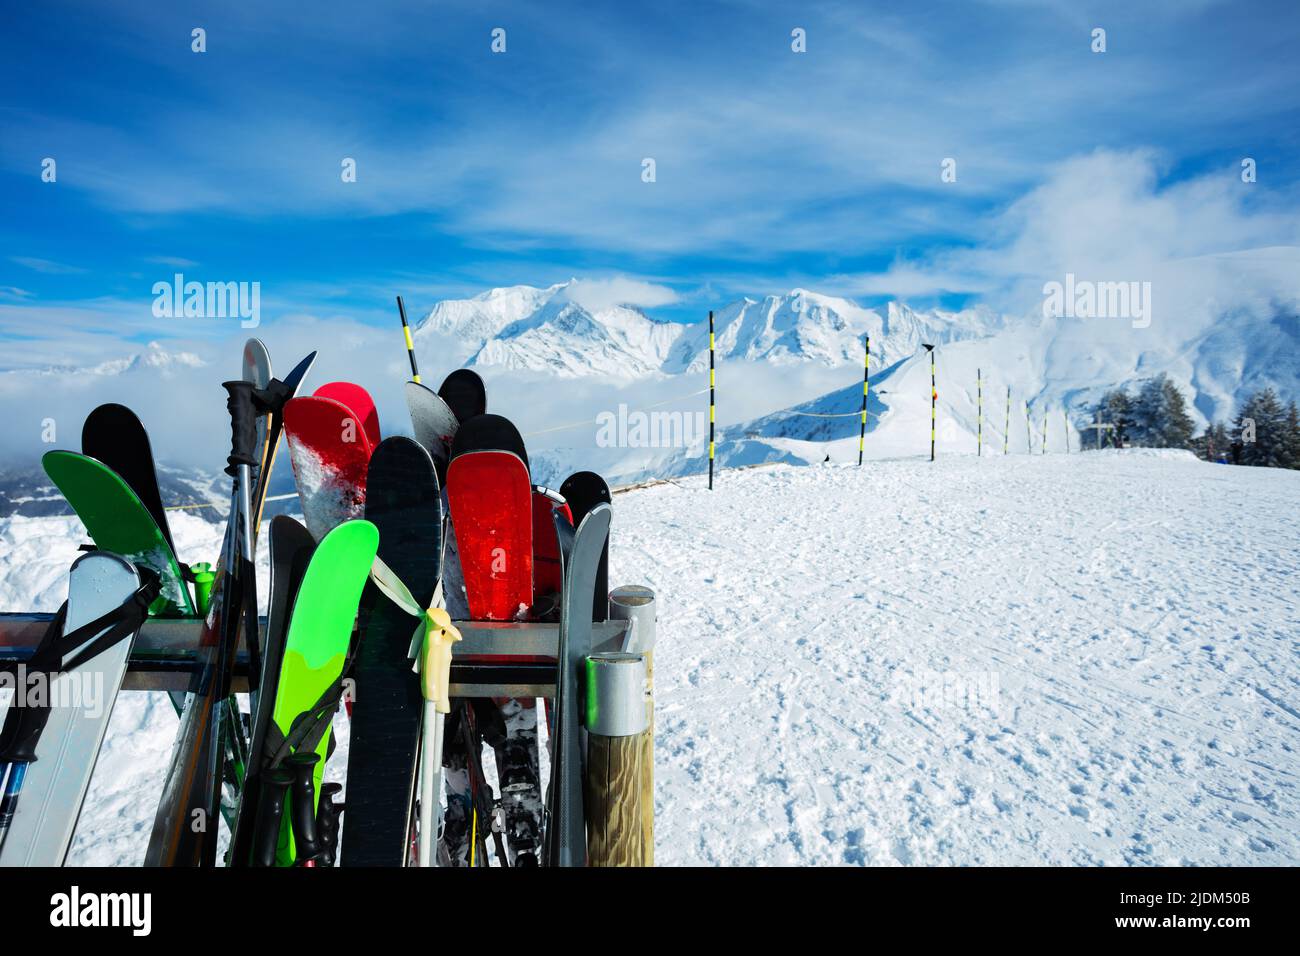 Many different alpine skis over mountain peaks and clouds Stock Photo